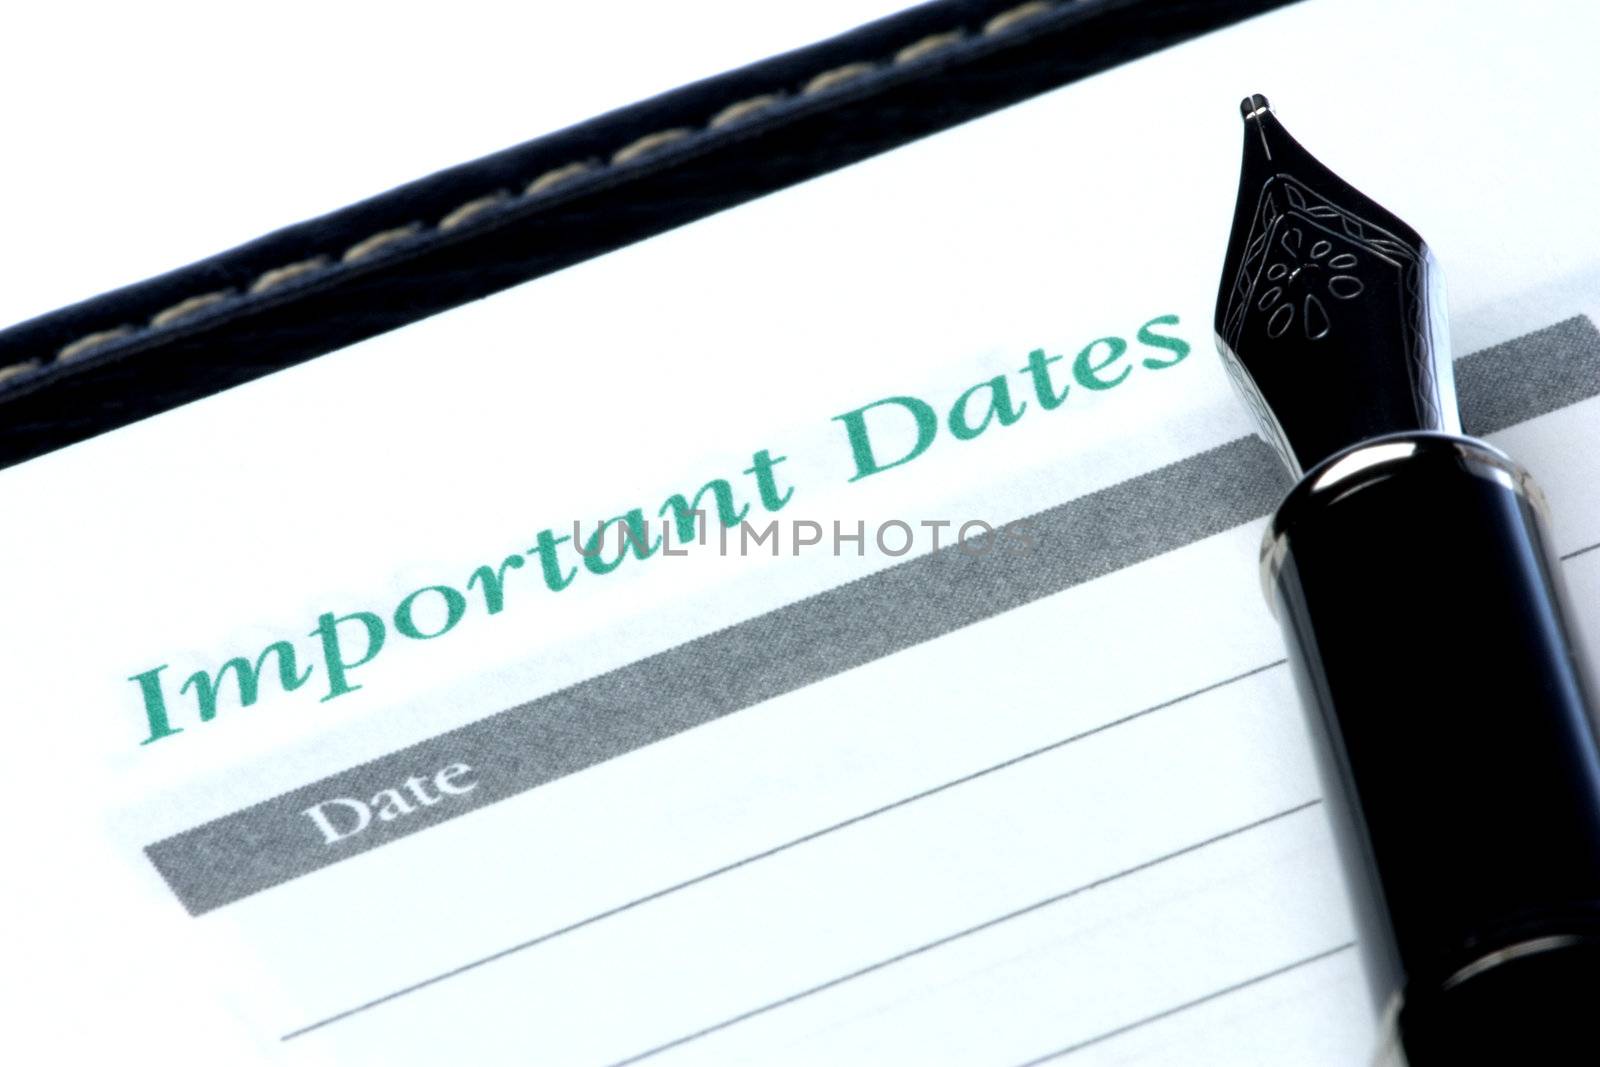 Important Dates by shariffc